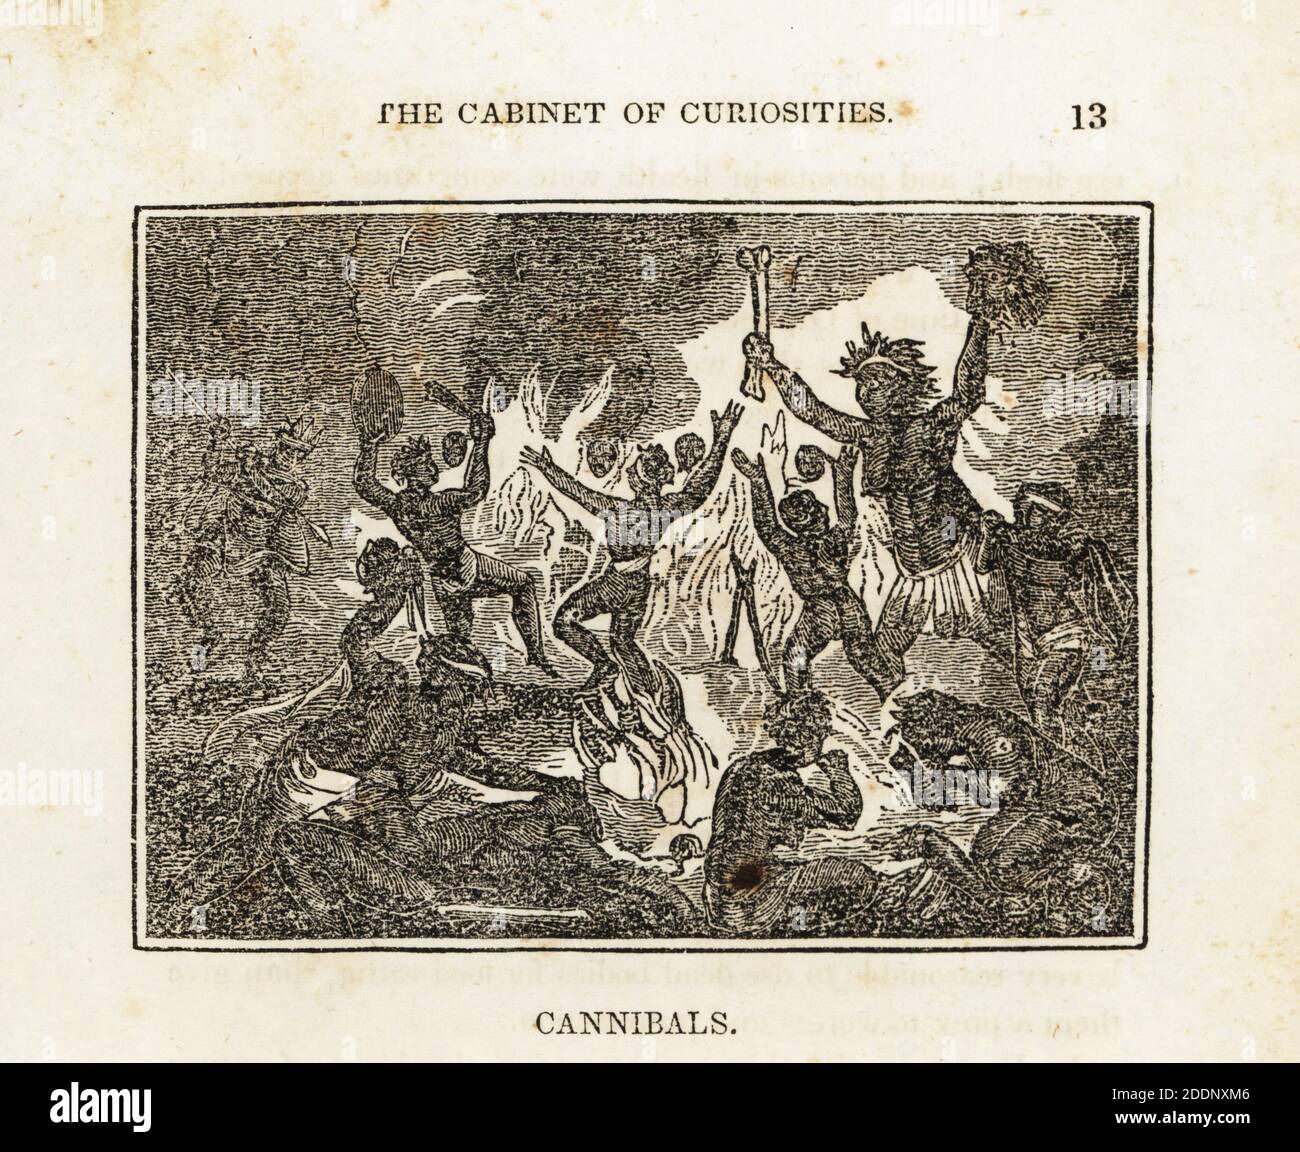 Cannibals dancing around a fire, holding human heads and bones, others gnawing on human flesh. Woodcut from The Cabinet of Curiosities, or Wonders of the World Displayed, Henry Piercy, New York, 1836. Stock Photo